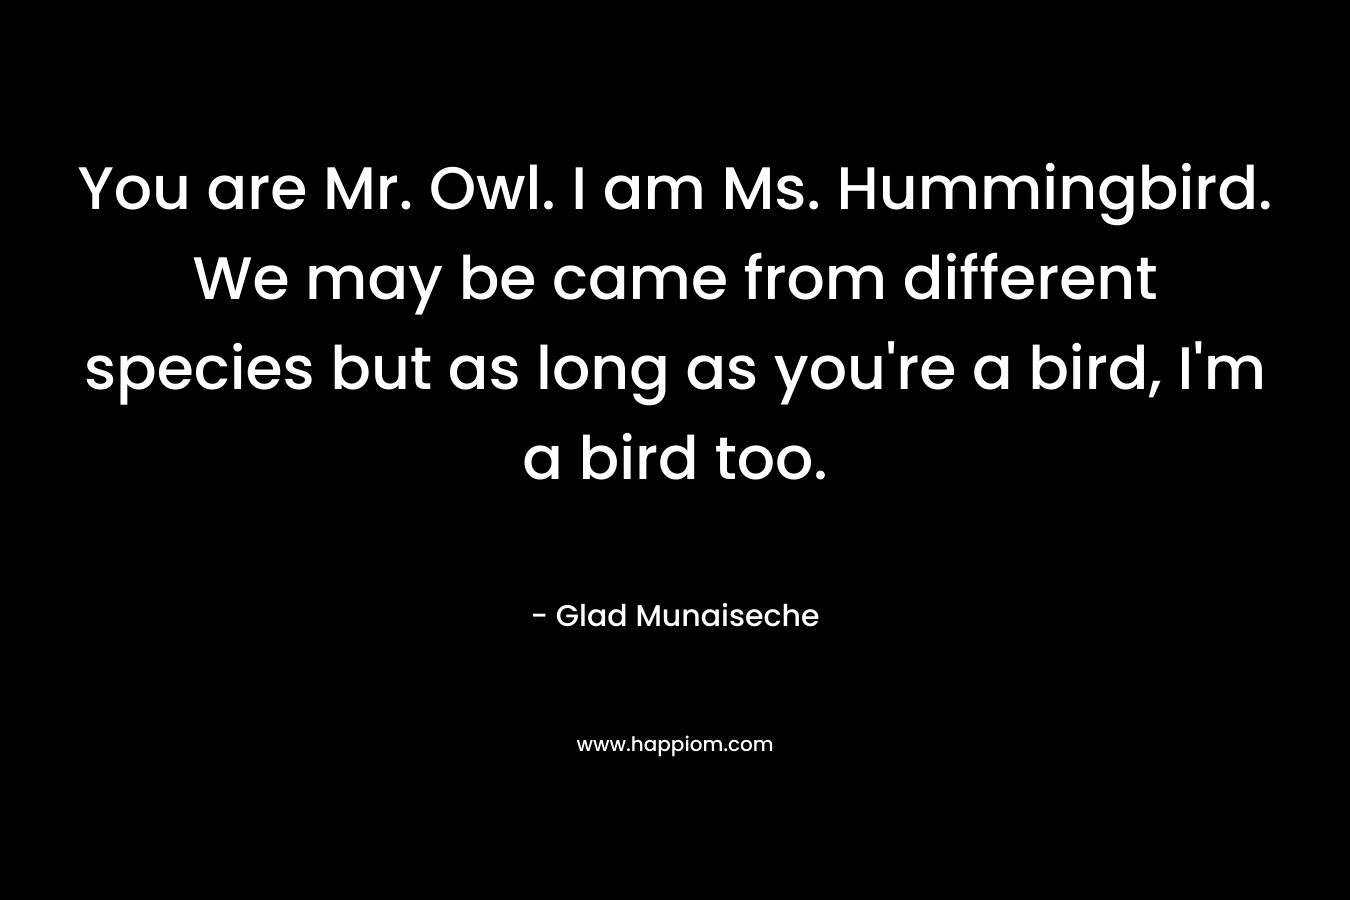 You are Mr. Owl. I am Ms. Hummingbird. We may be came from different species but as long as you’re a bird, I’m a bird too. – Glad Munaiseche